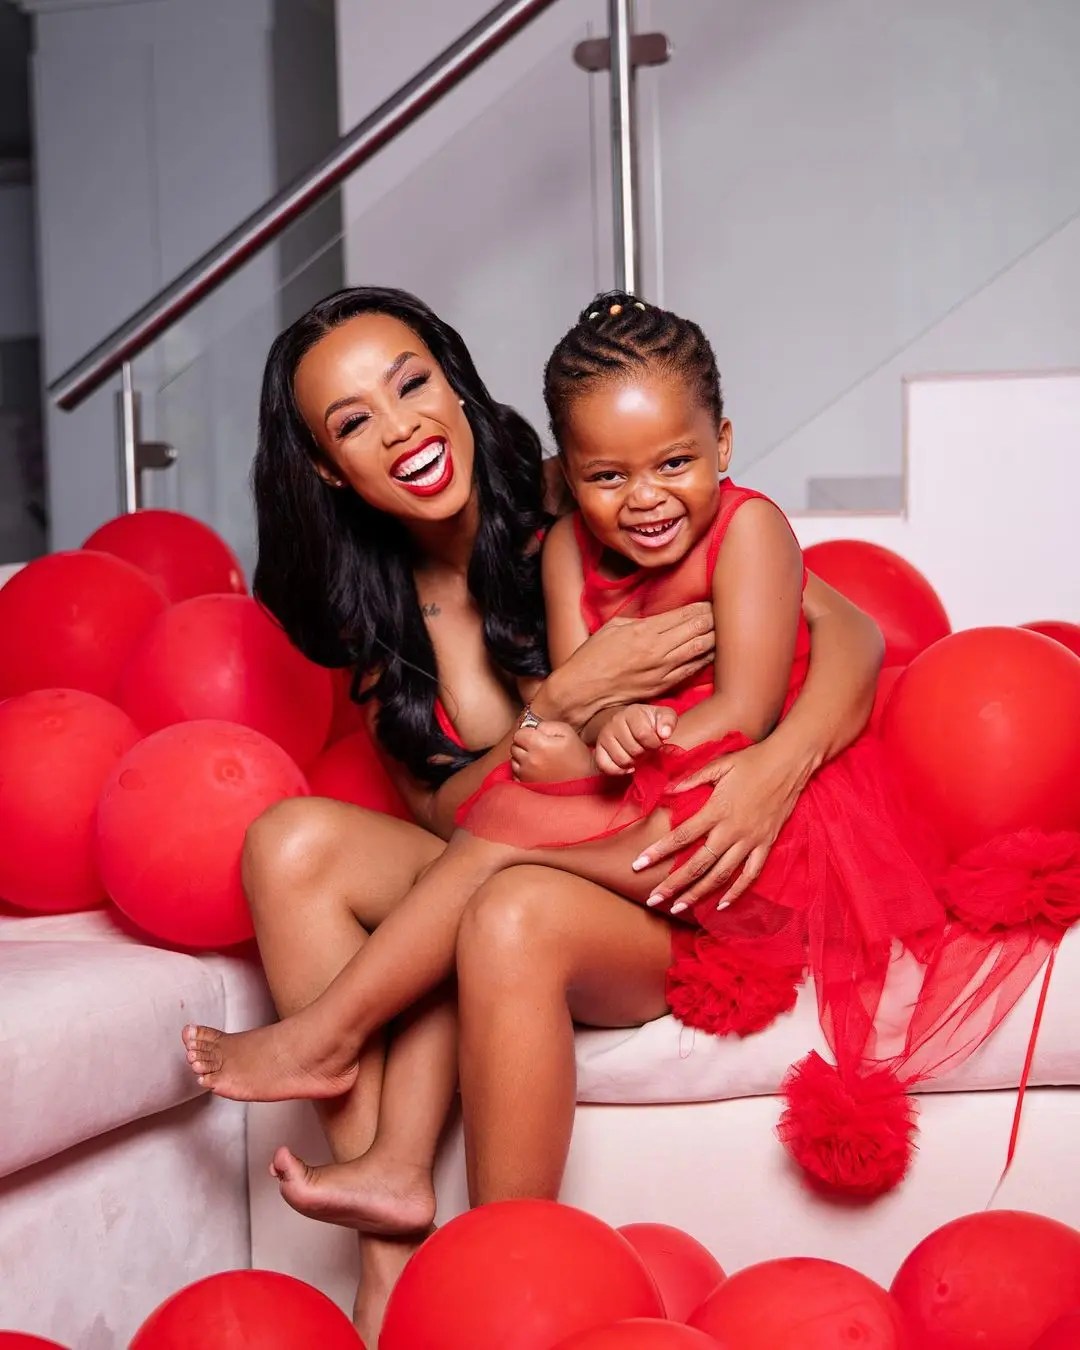 Ntando Duma and Sbahle are always giving their fans the mother-daughter goals